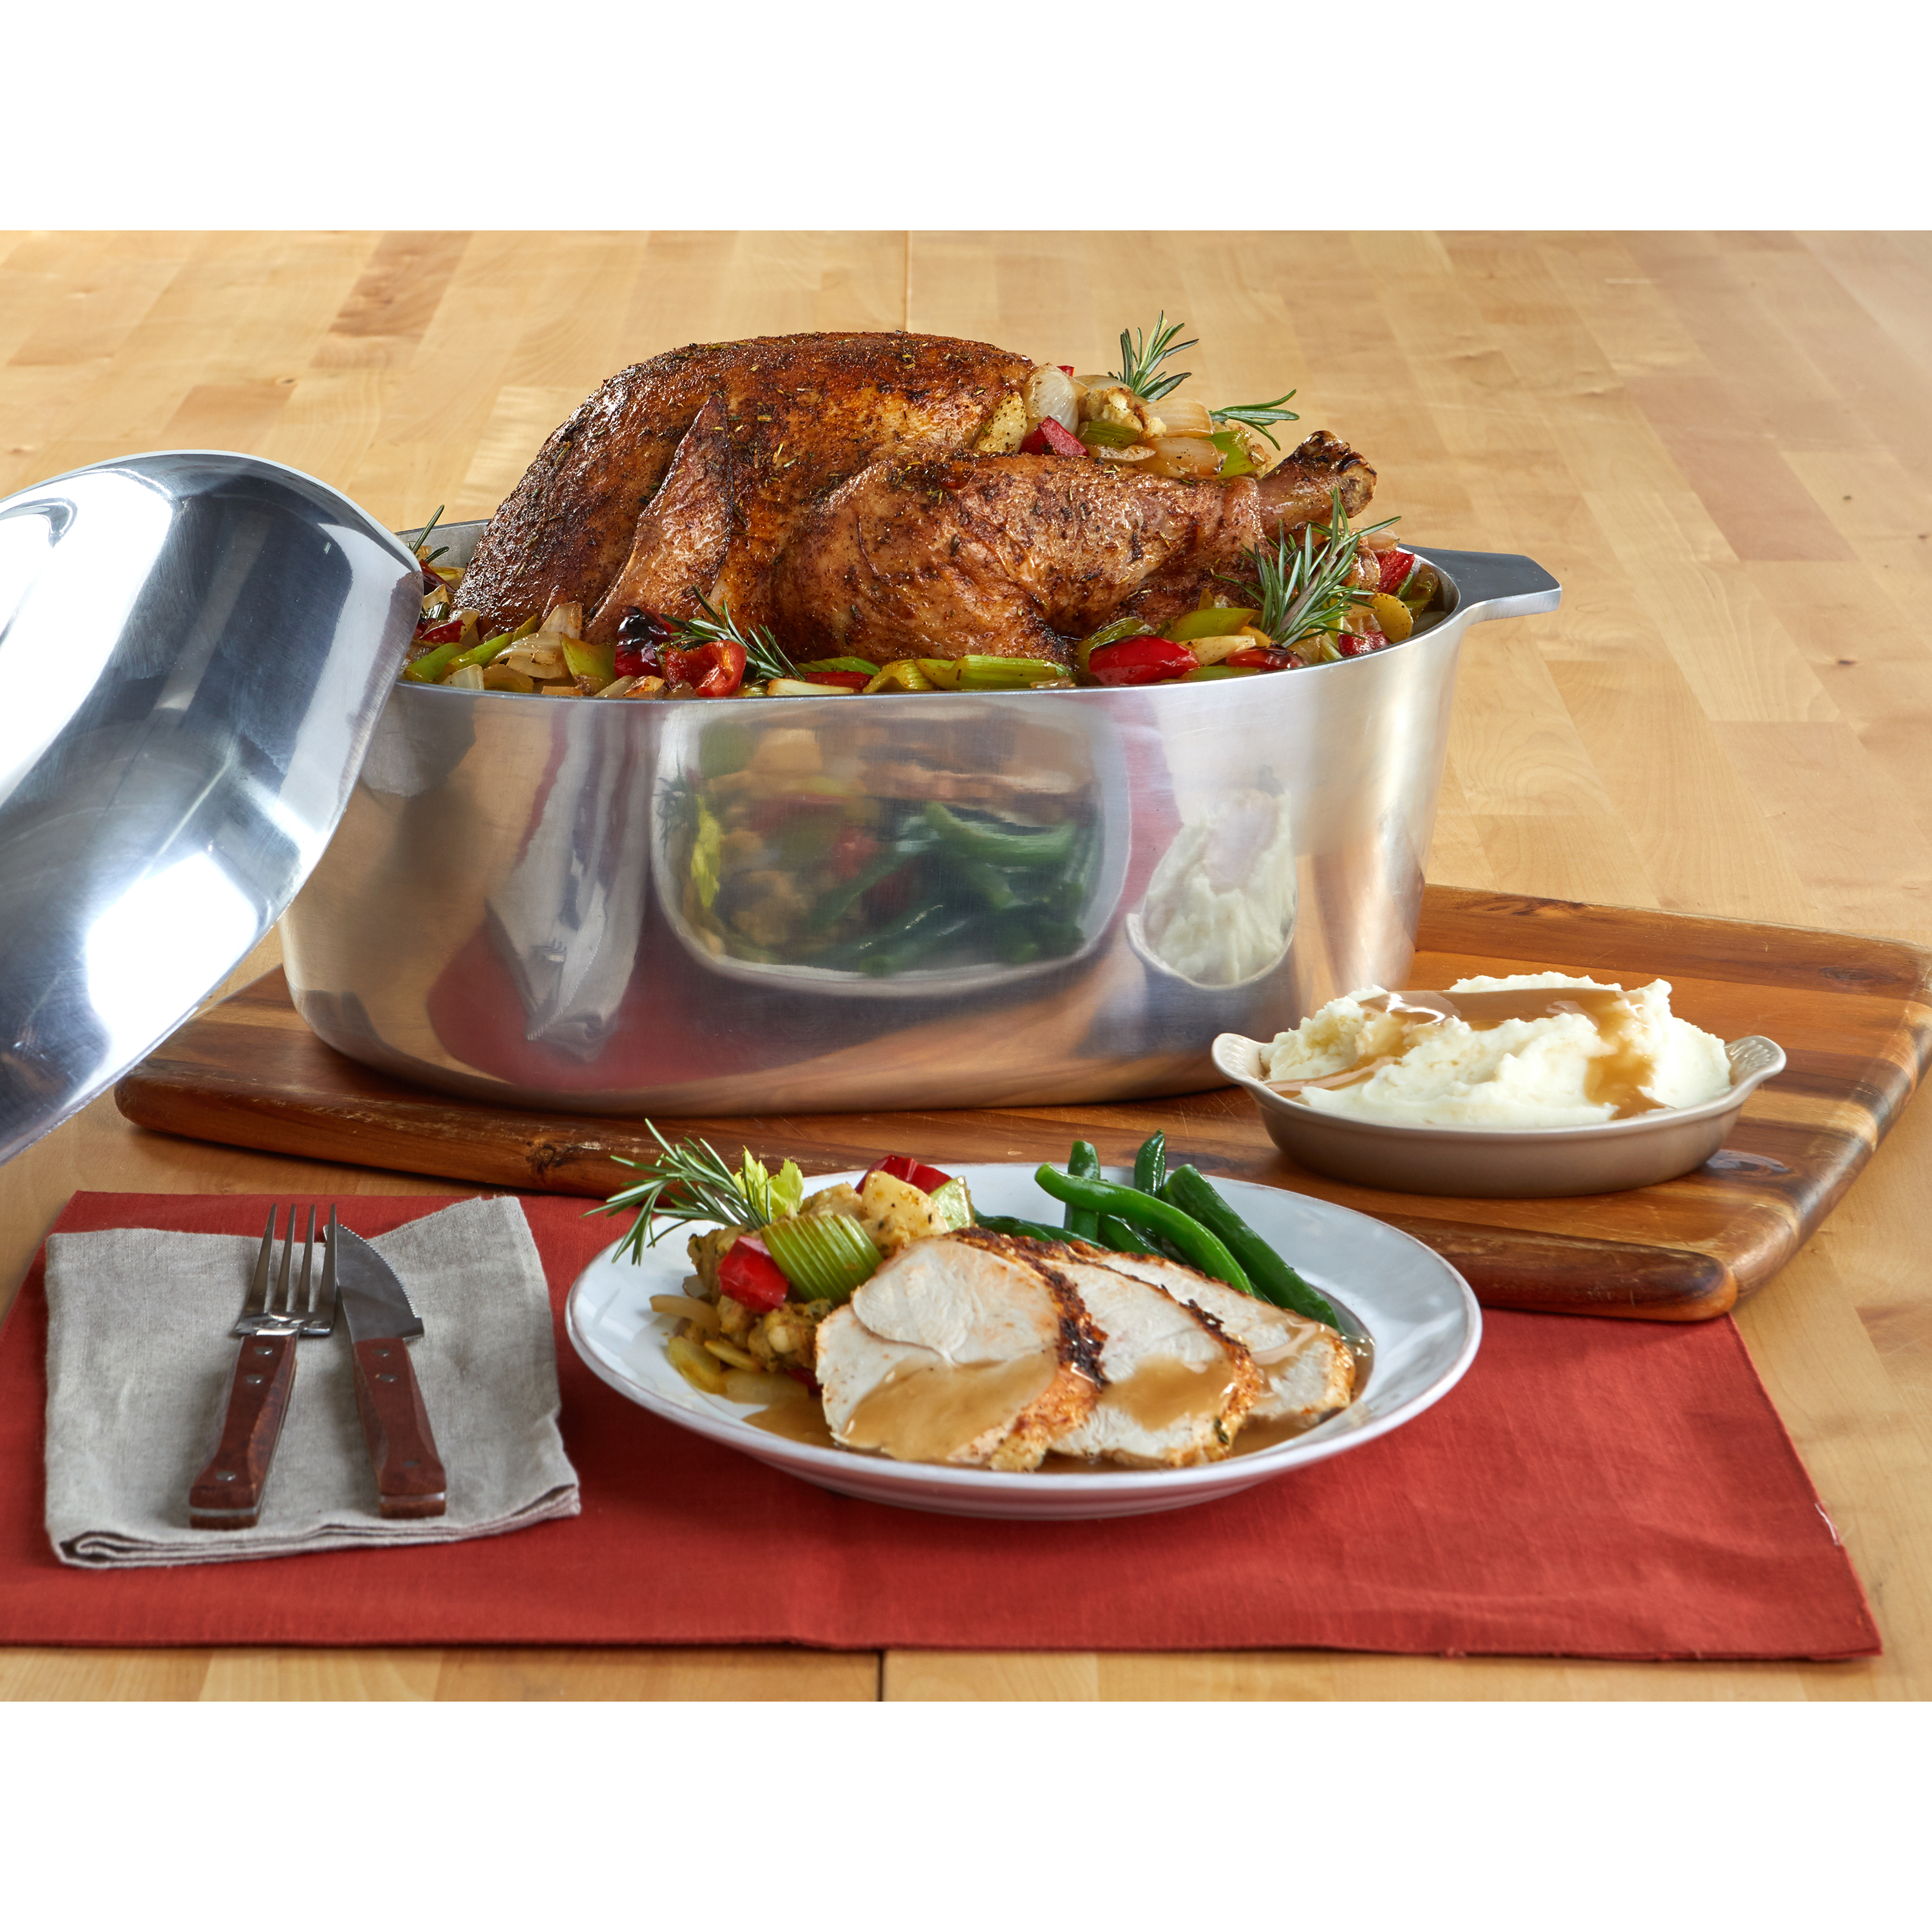 IMUSA USA Heavy Duty Large Cajun Roaster with Lid (Product Information) 